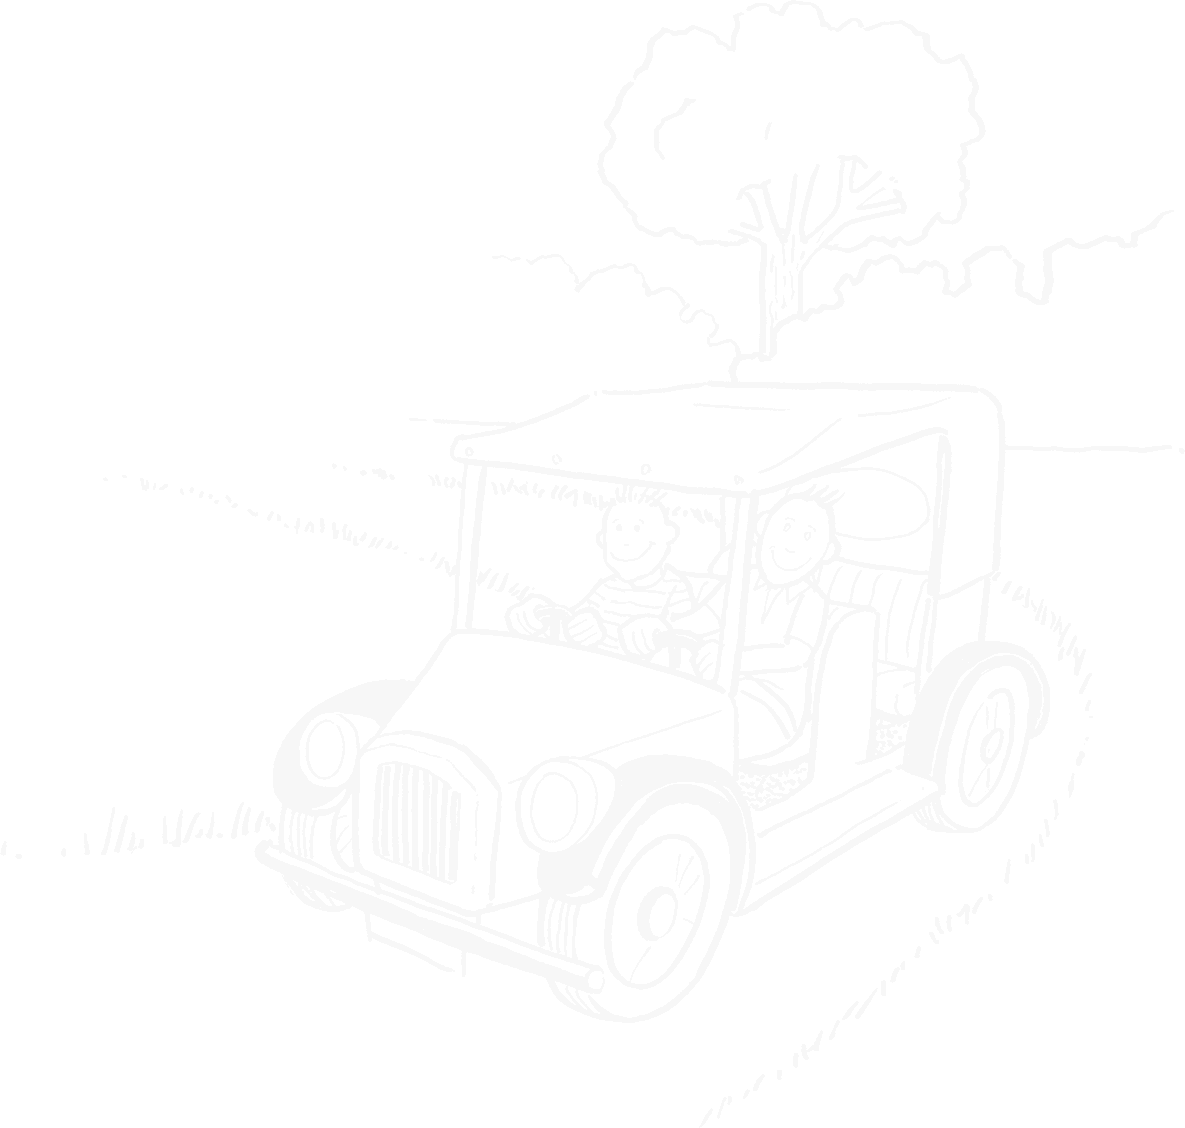 Illustration of man driving car on a country lane